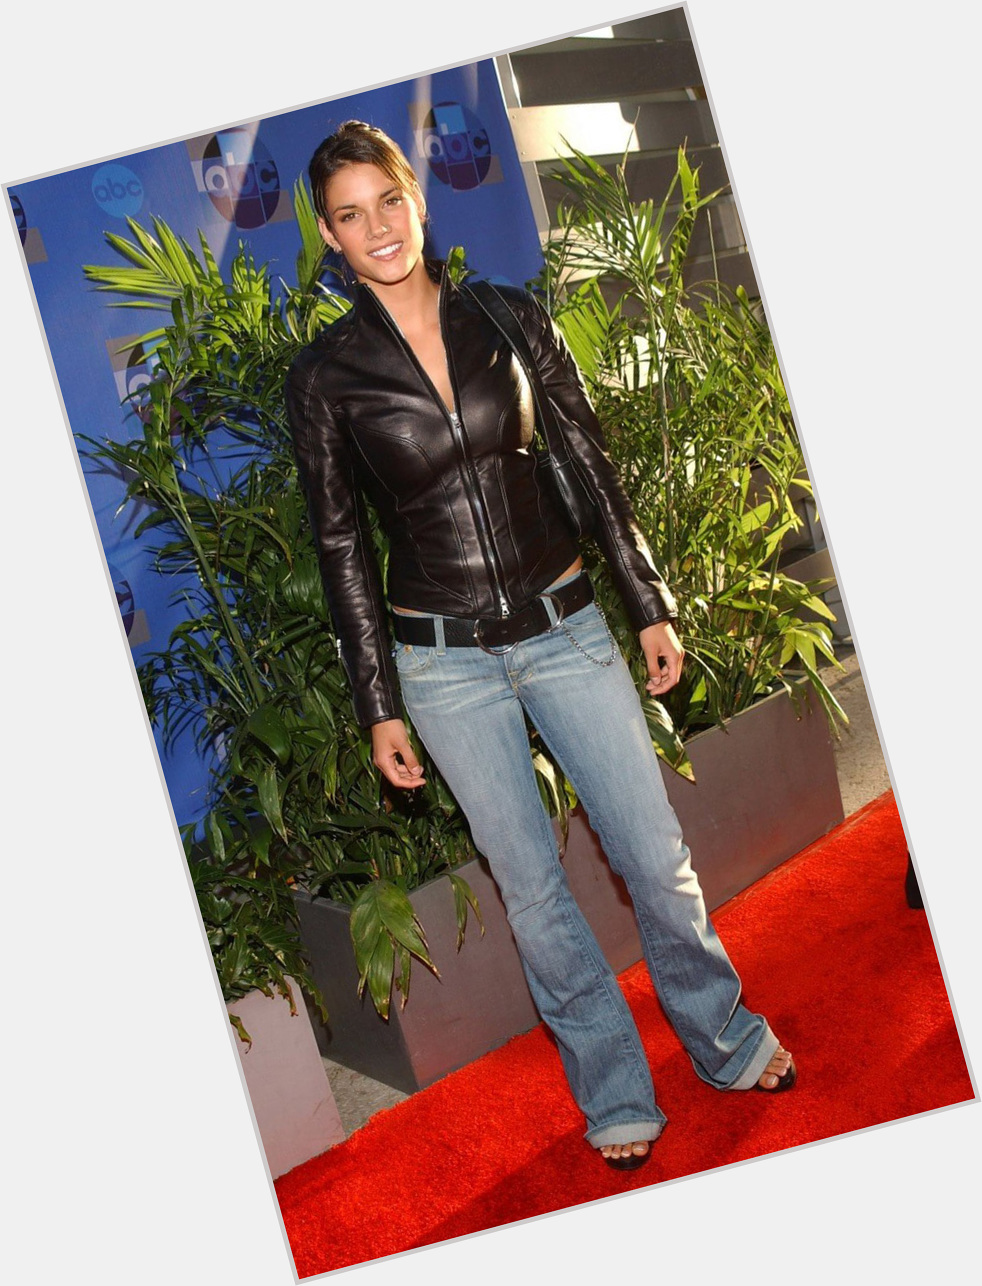 Happy 39th Birthday Shout Out to the lovely Missy Peregrym!! 